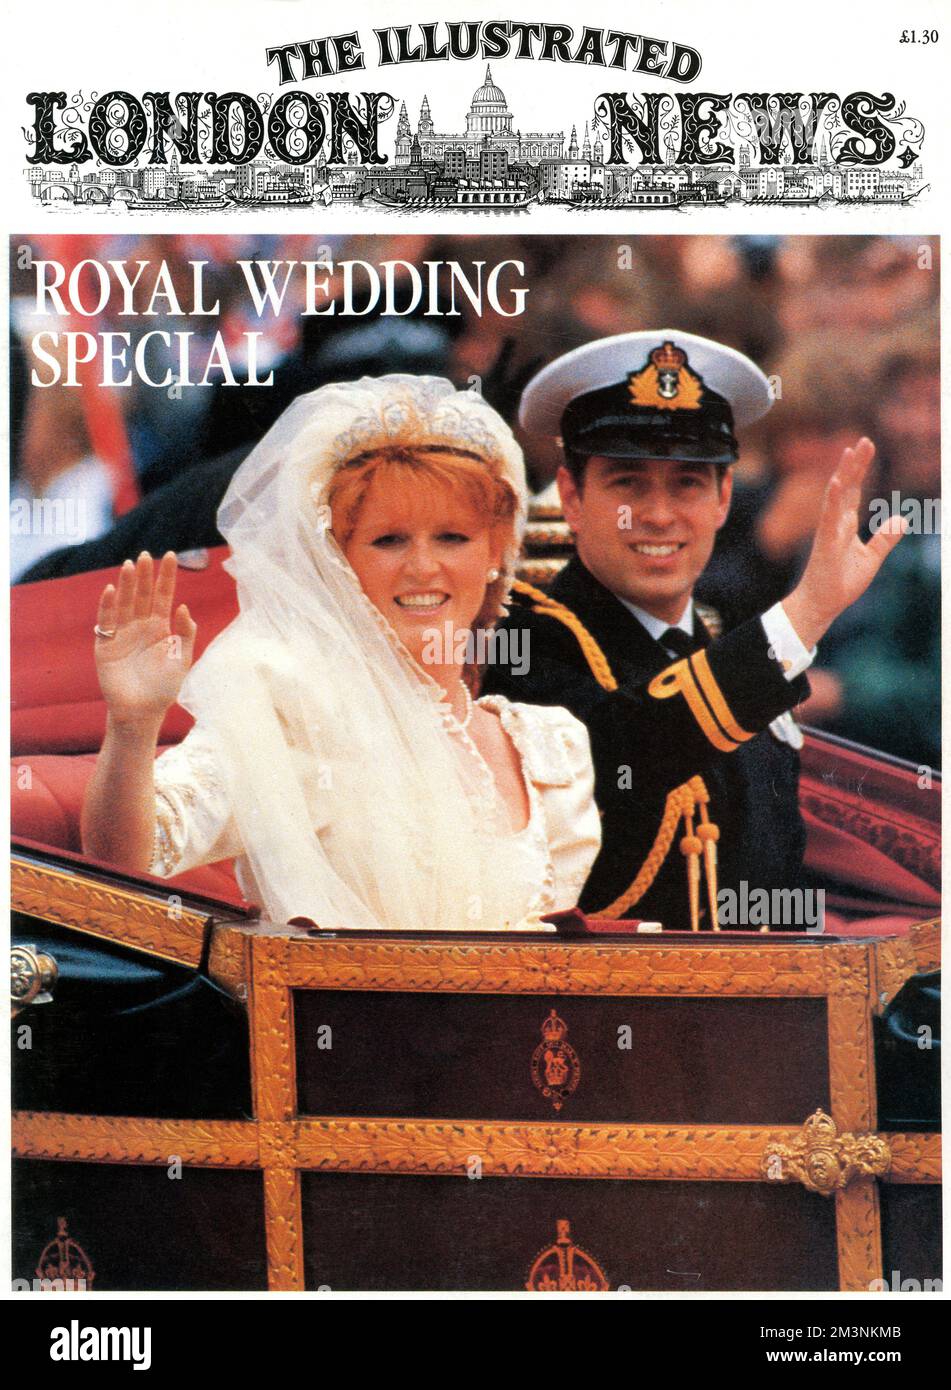 Front cover of The Illustrated London News celebrating the marriage of Prince Andrew, Duke of York to Lady Sarah Ferguson at Westminster Abbey on 23 July 1986. Stock Photo